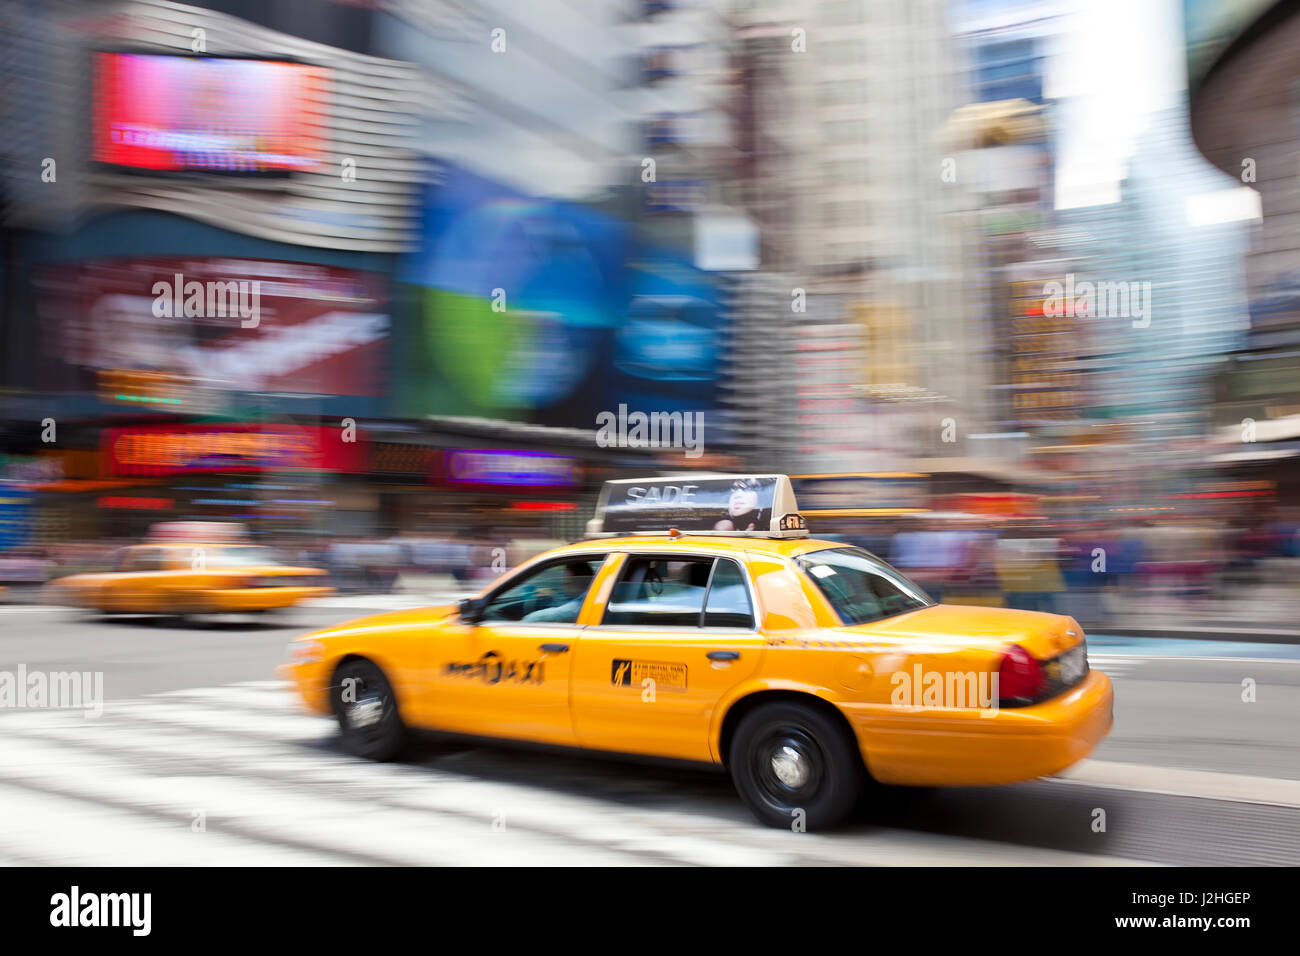 Yellow taxi Cabs, just off Times Square, Manhattan, New York Stock Photo